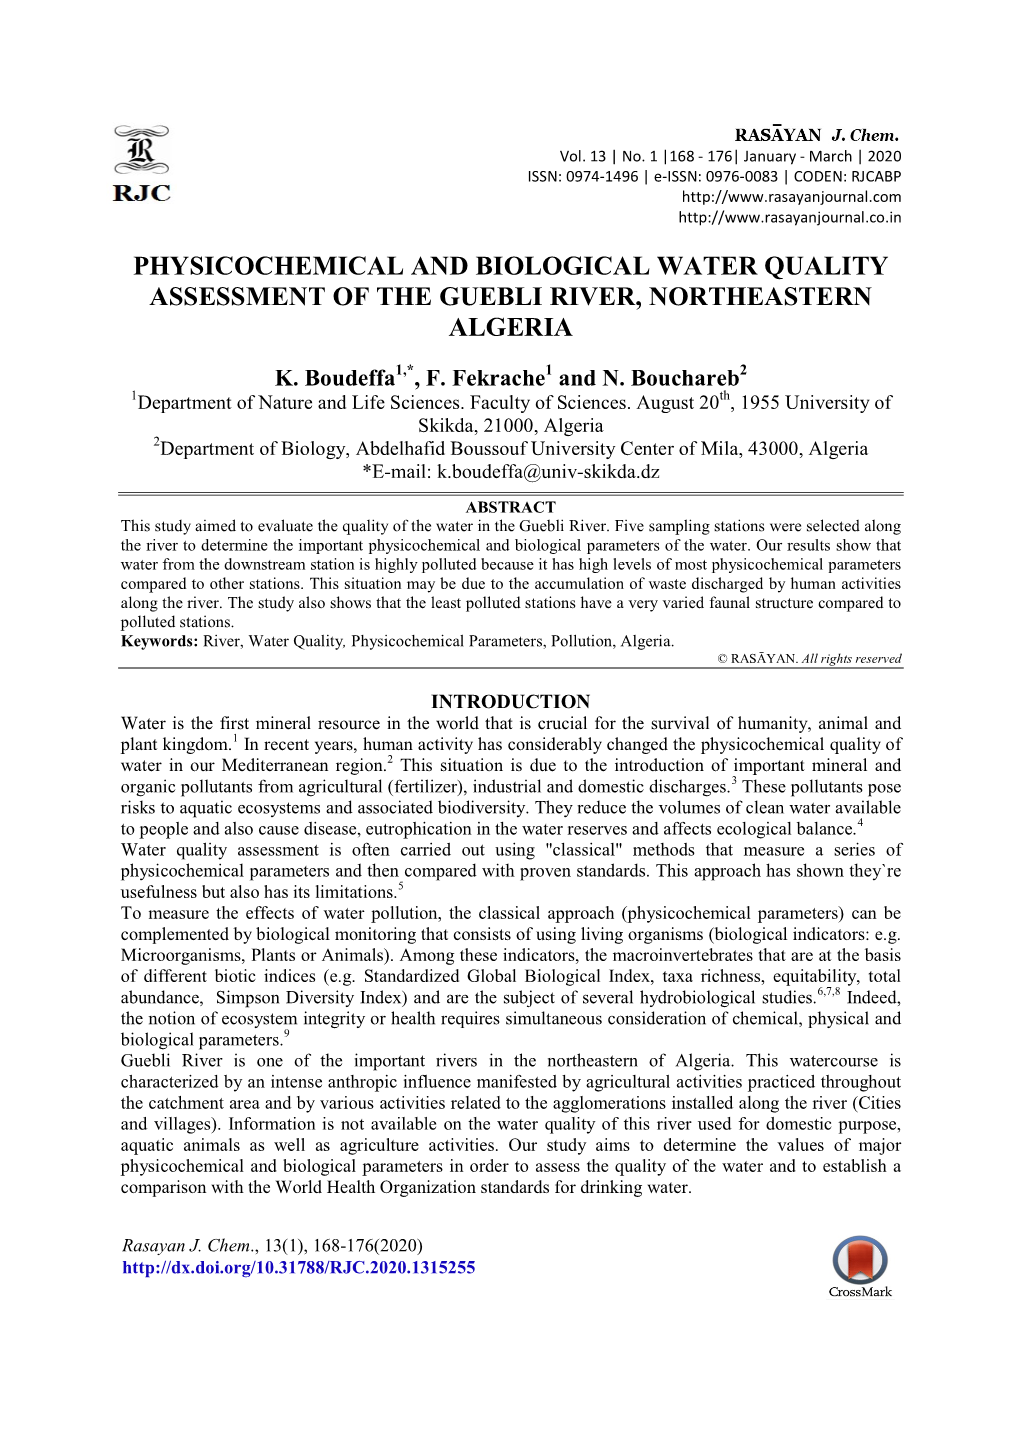 Physicochemical and Biological Water Quality Assessment of the Guebli River, Northeastern Algeria